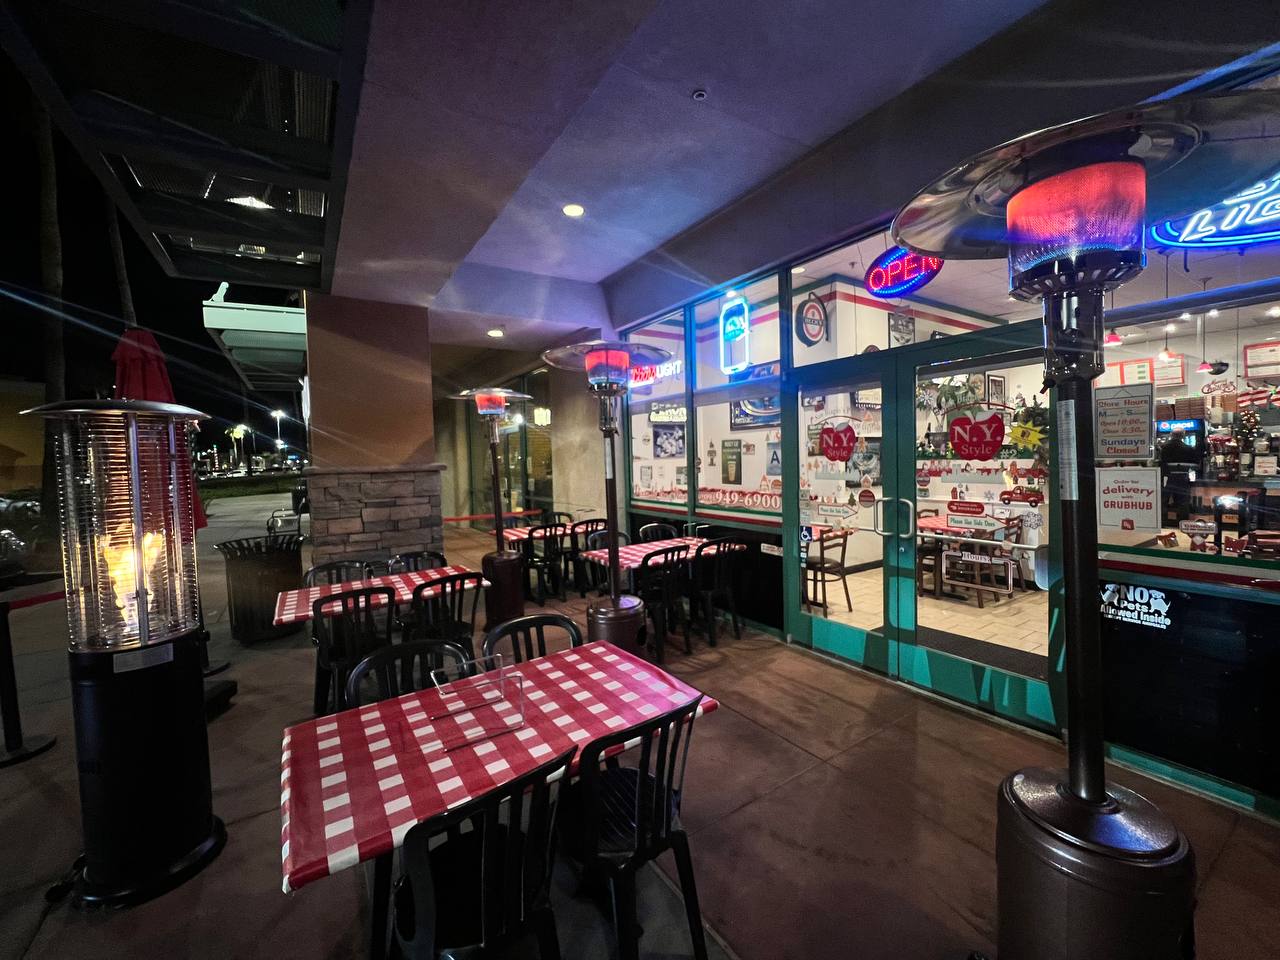 Photo of a outdoor seating at night in front of restraunt.